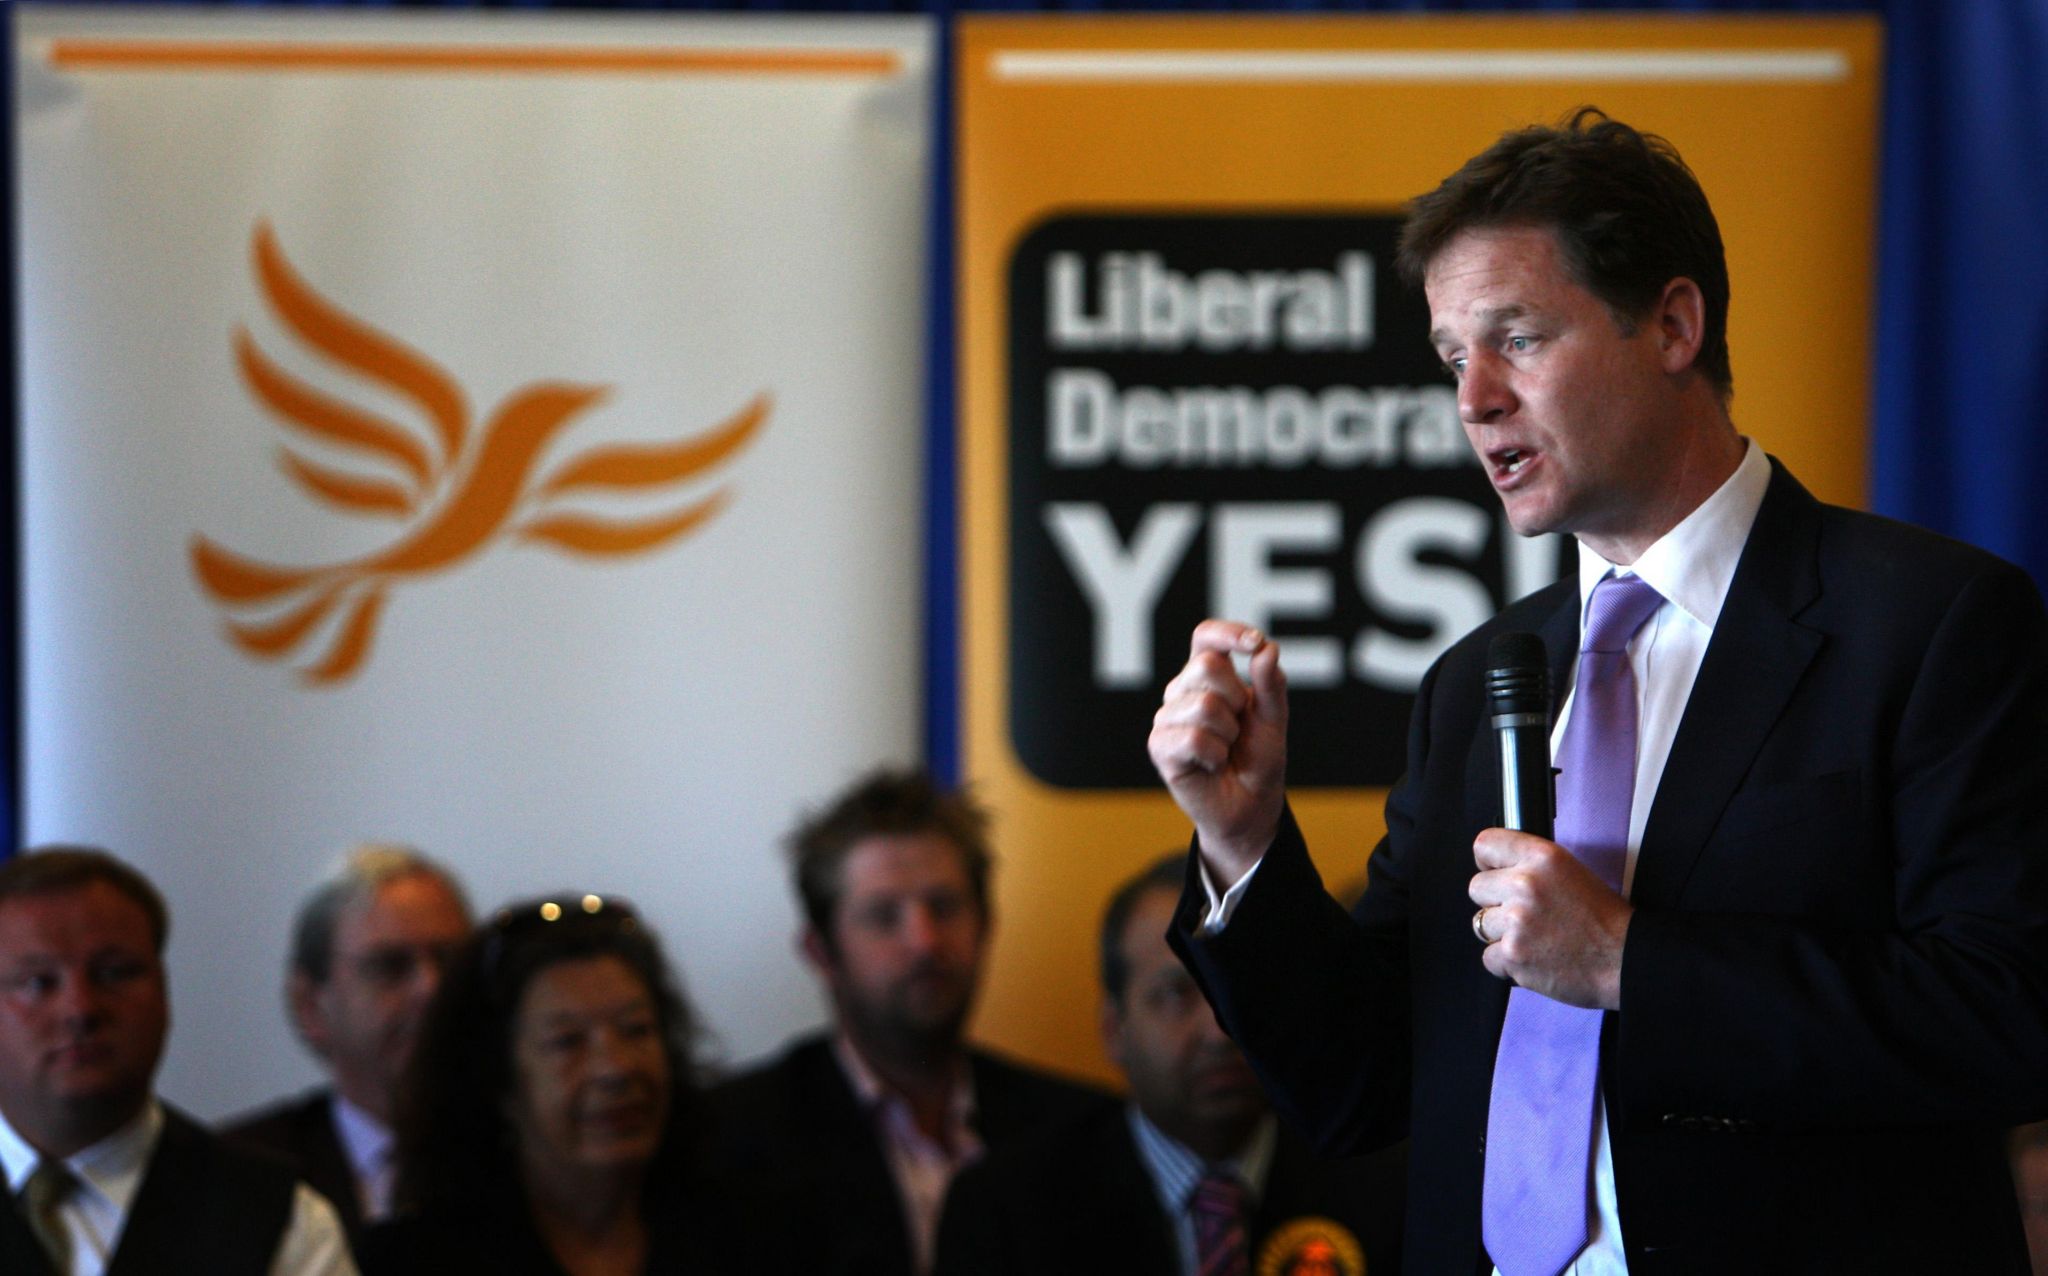 Nick Clegg answers questions during campaigns stop in Leicester for the for Yes campaign